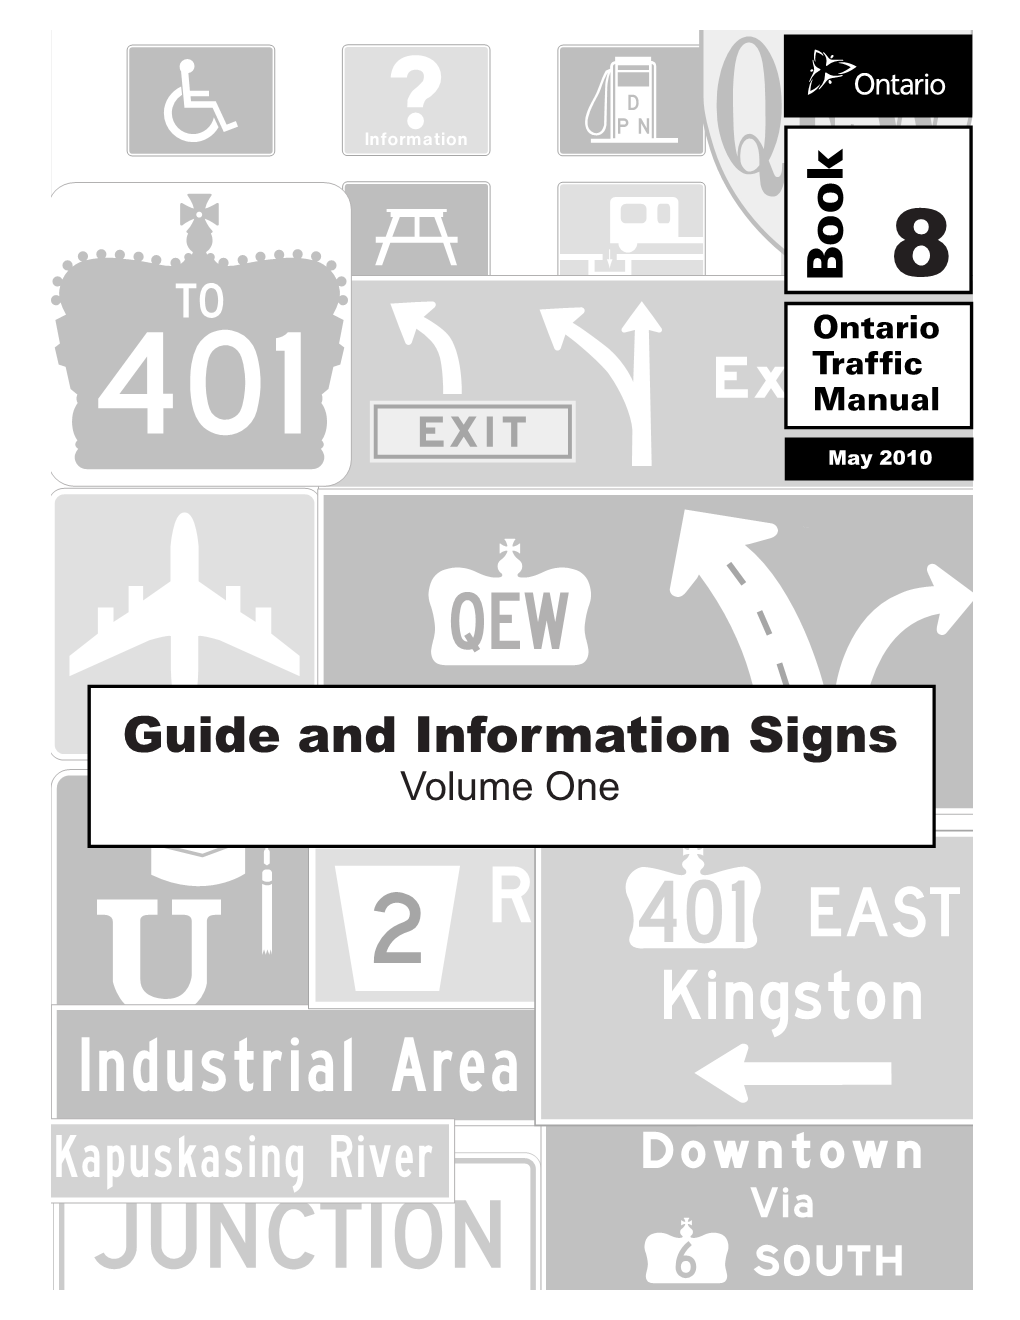 Guide and Information Signs Volume One